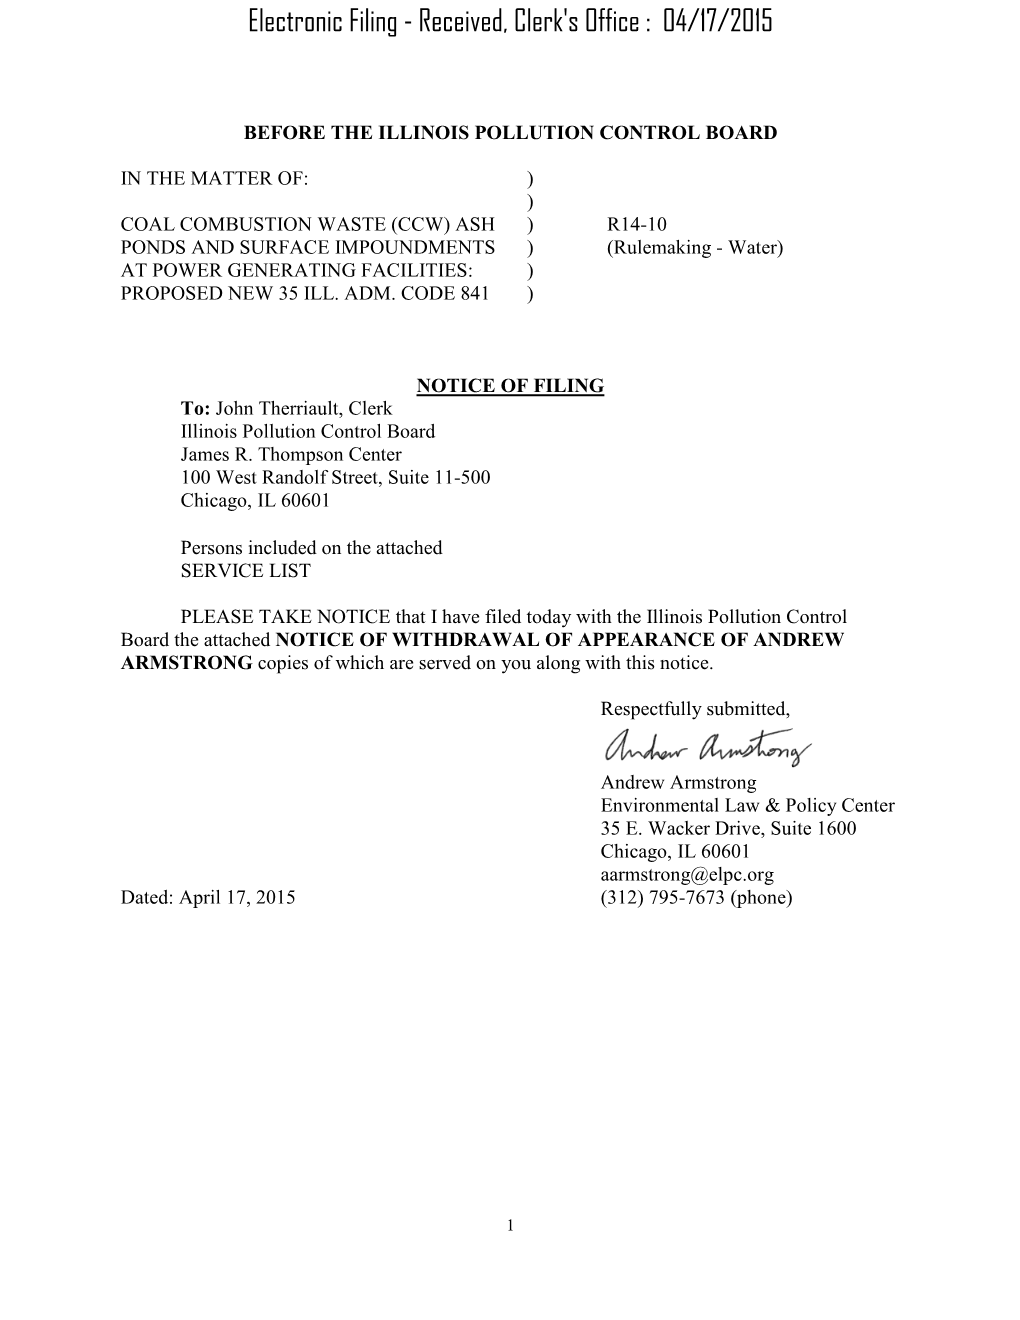 Electronic Filing - Received, Clerk's Office : 04/17/2015